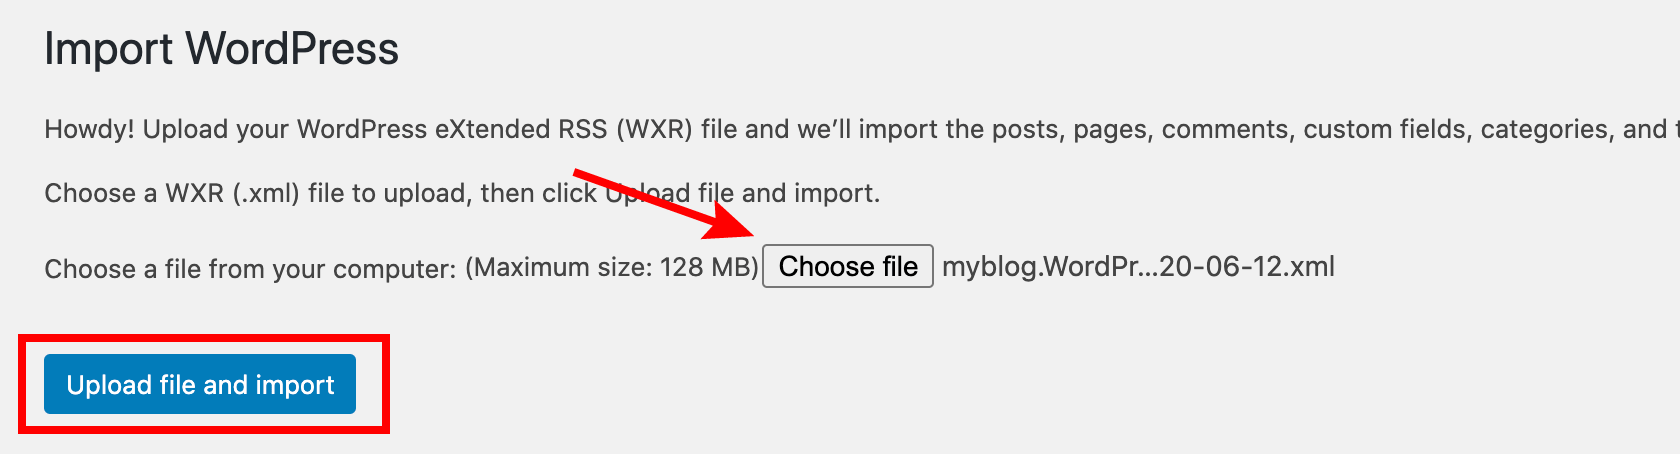 Choose a file to import into WordPress